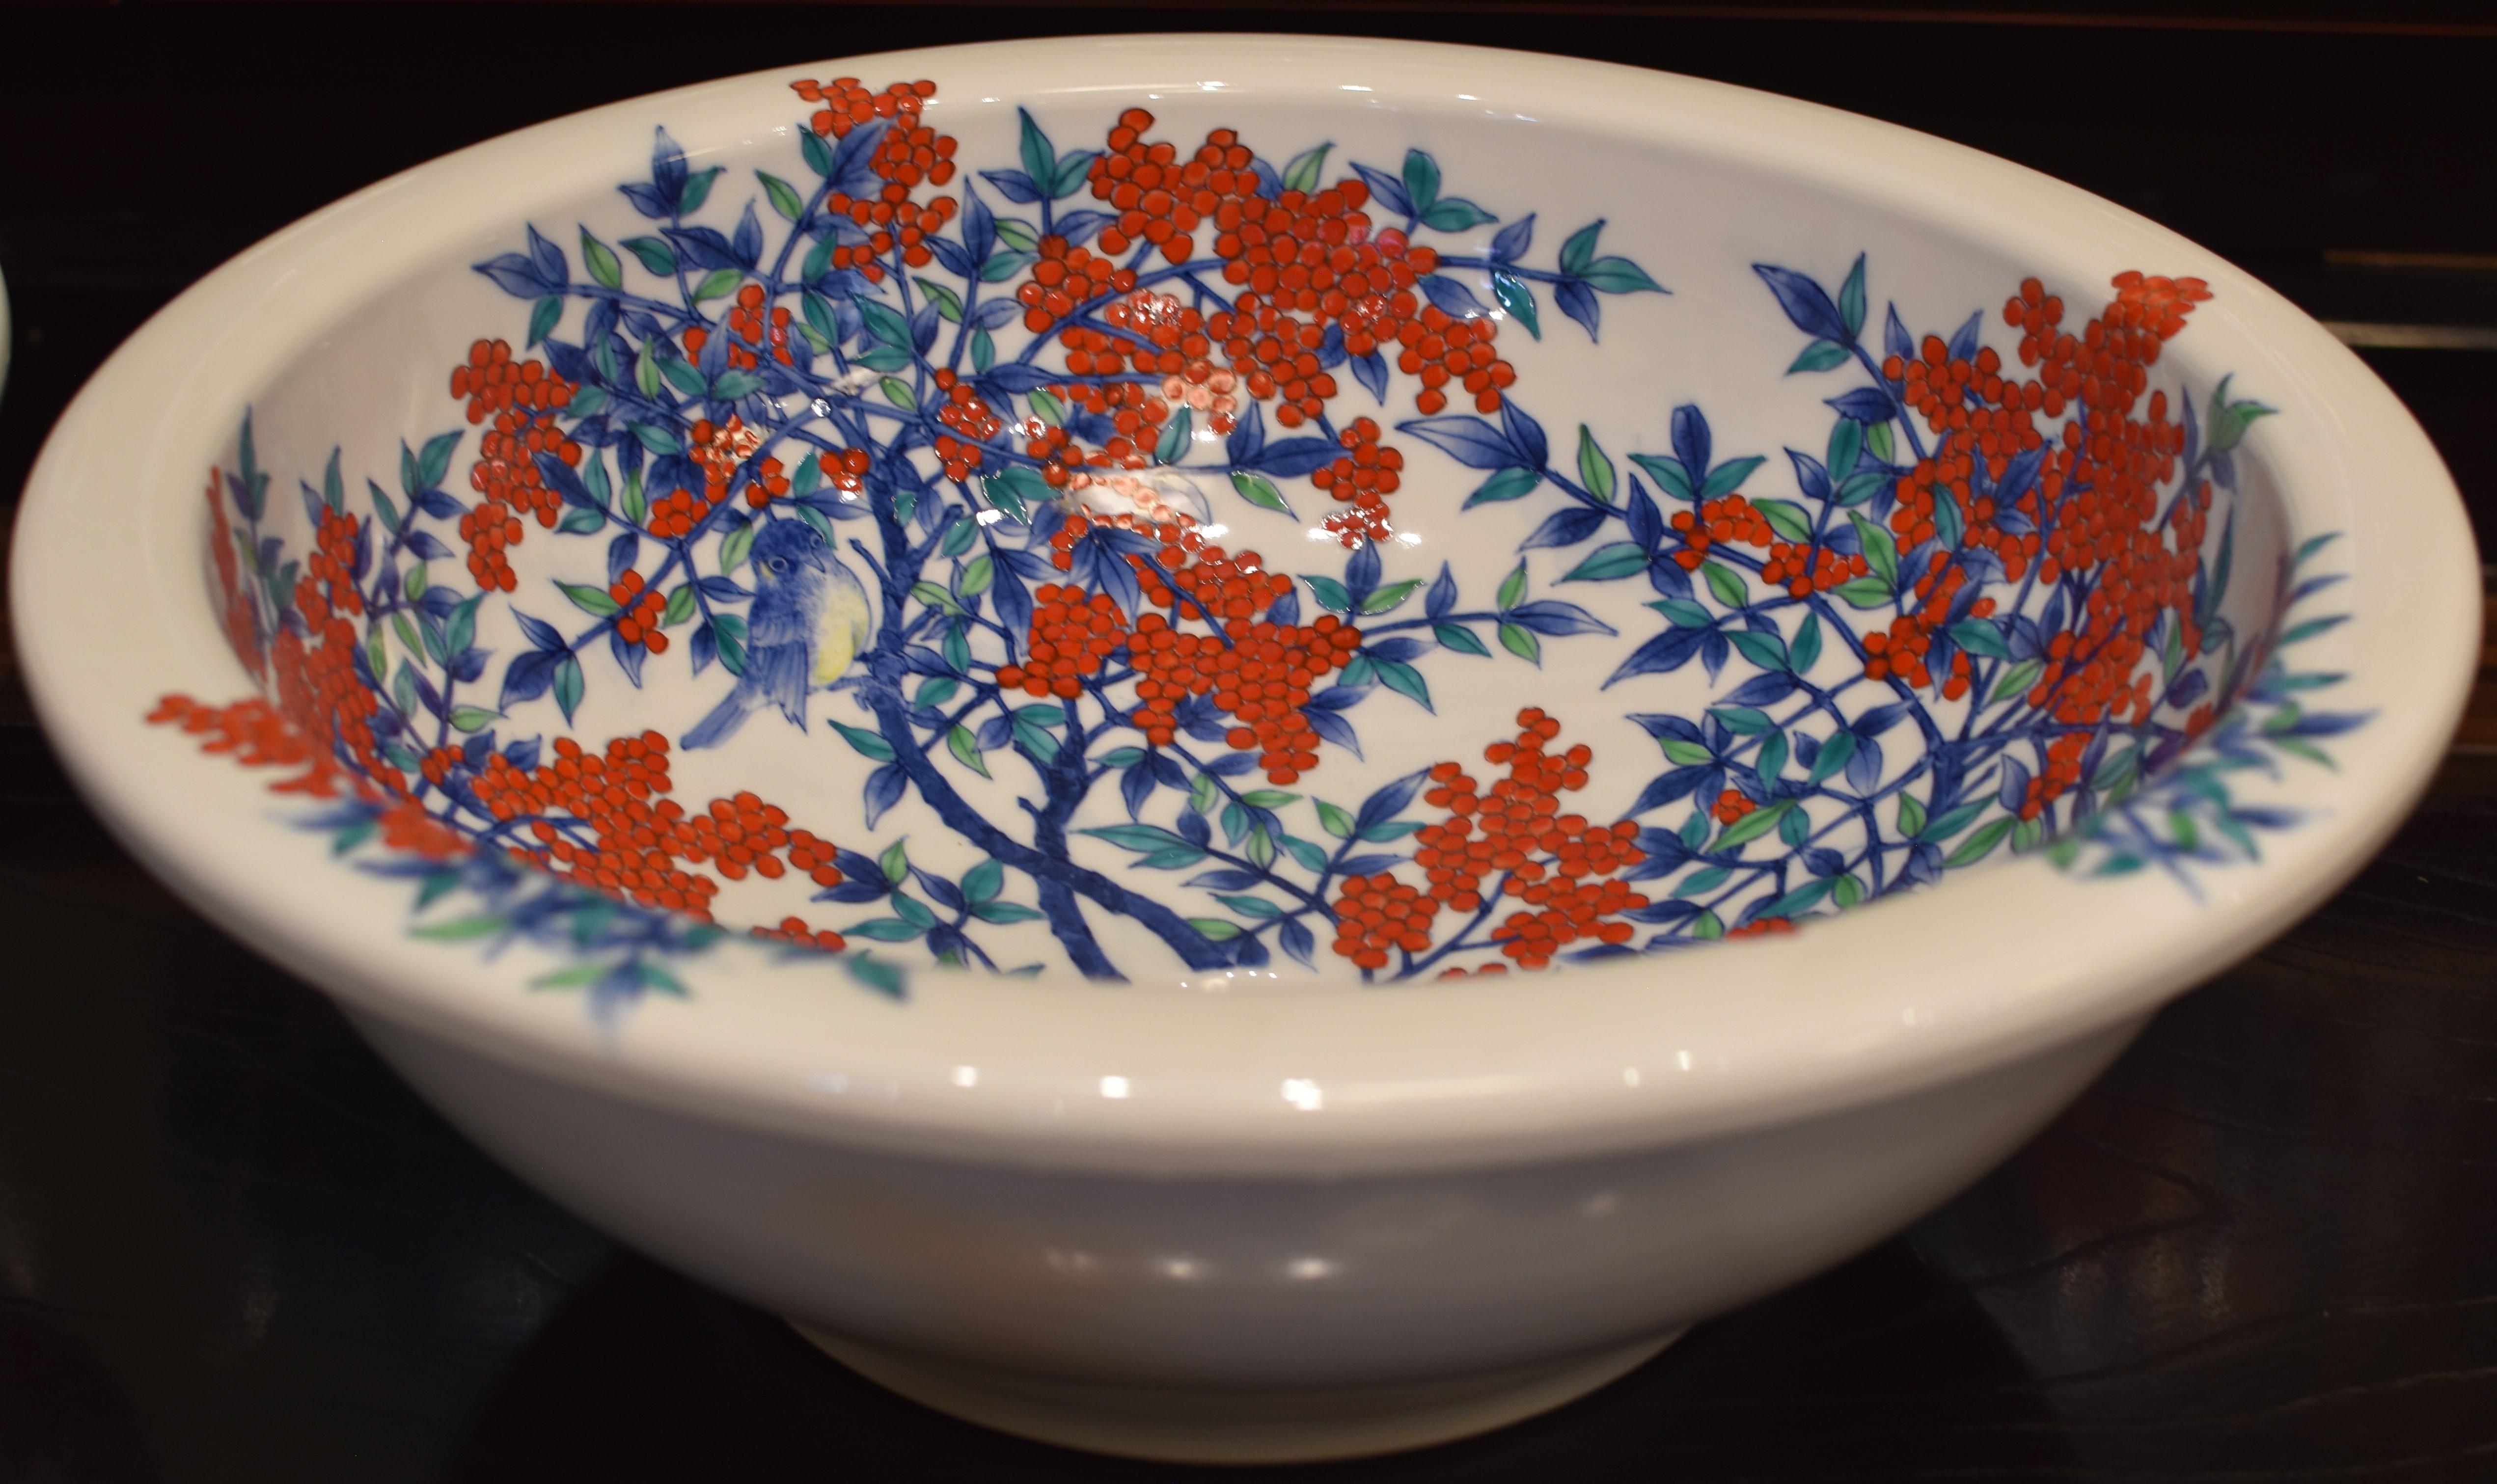 Contemporary Hand-Painted Porcelain Washbasin by Japanese Master Artist 7